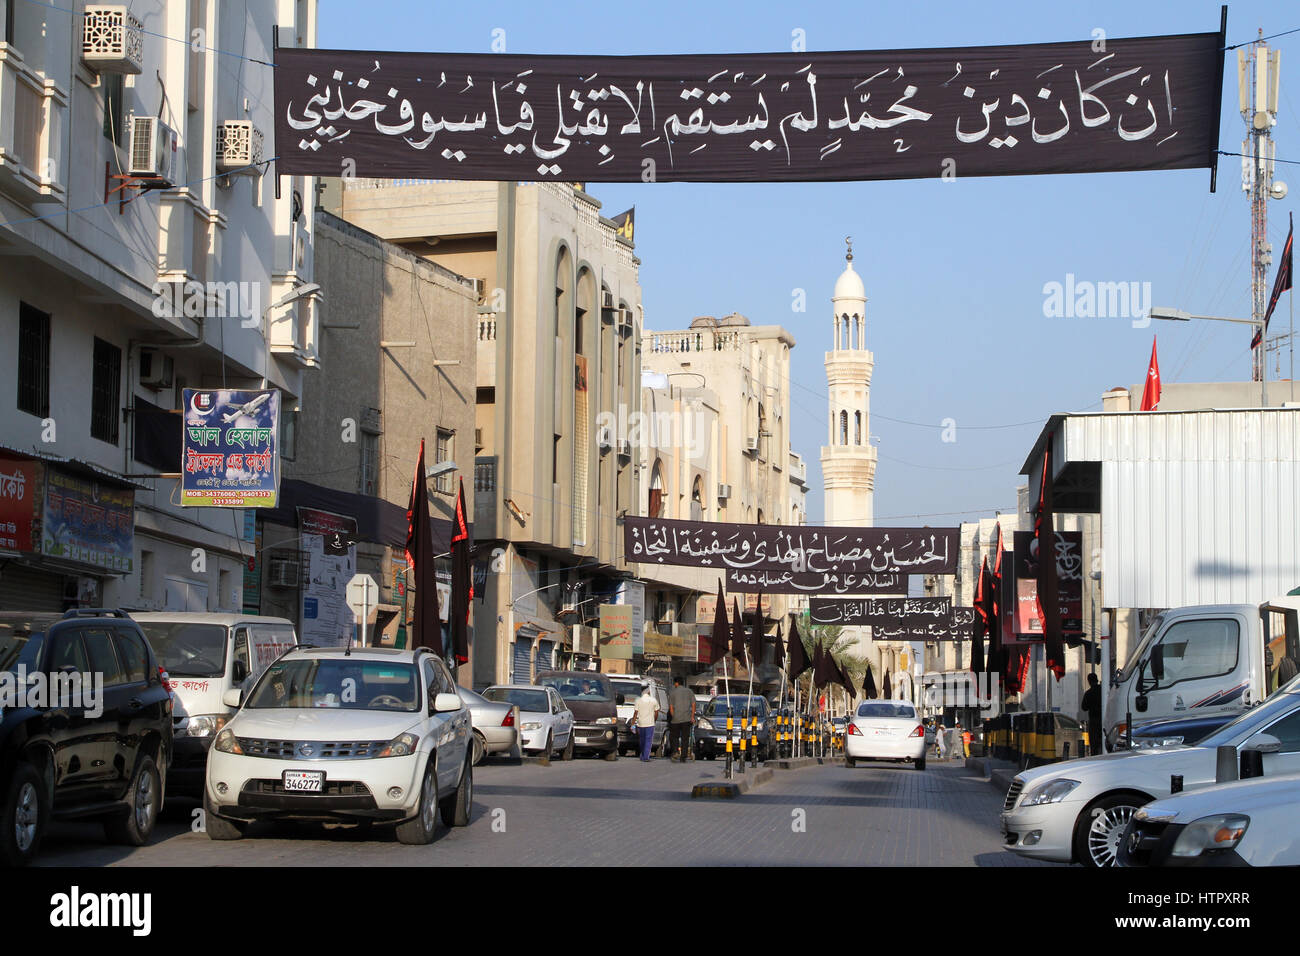 Shia slogans printed on banners hanging across the street in Manama, Bahrain. Stock Photo